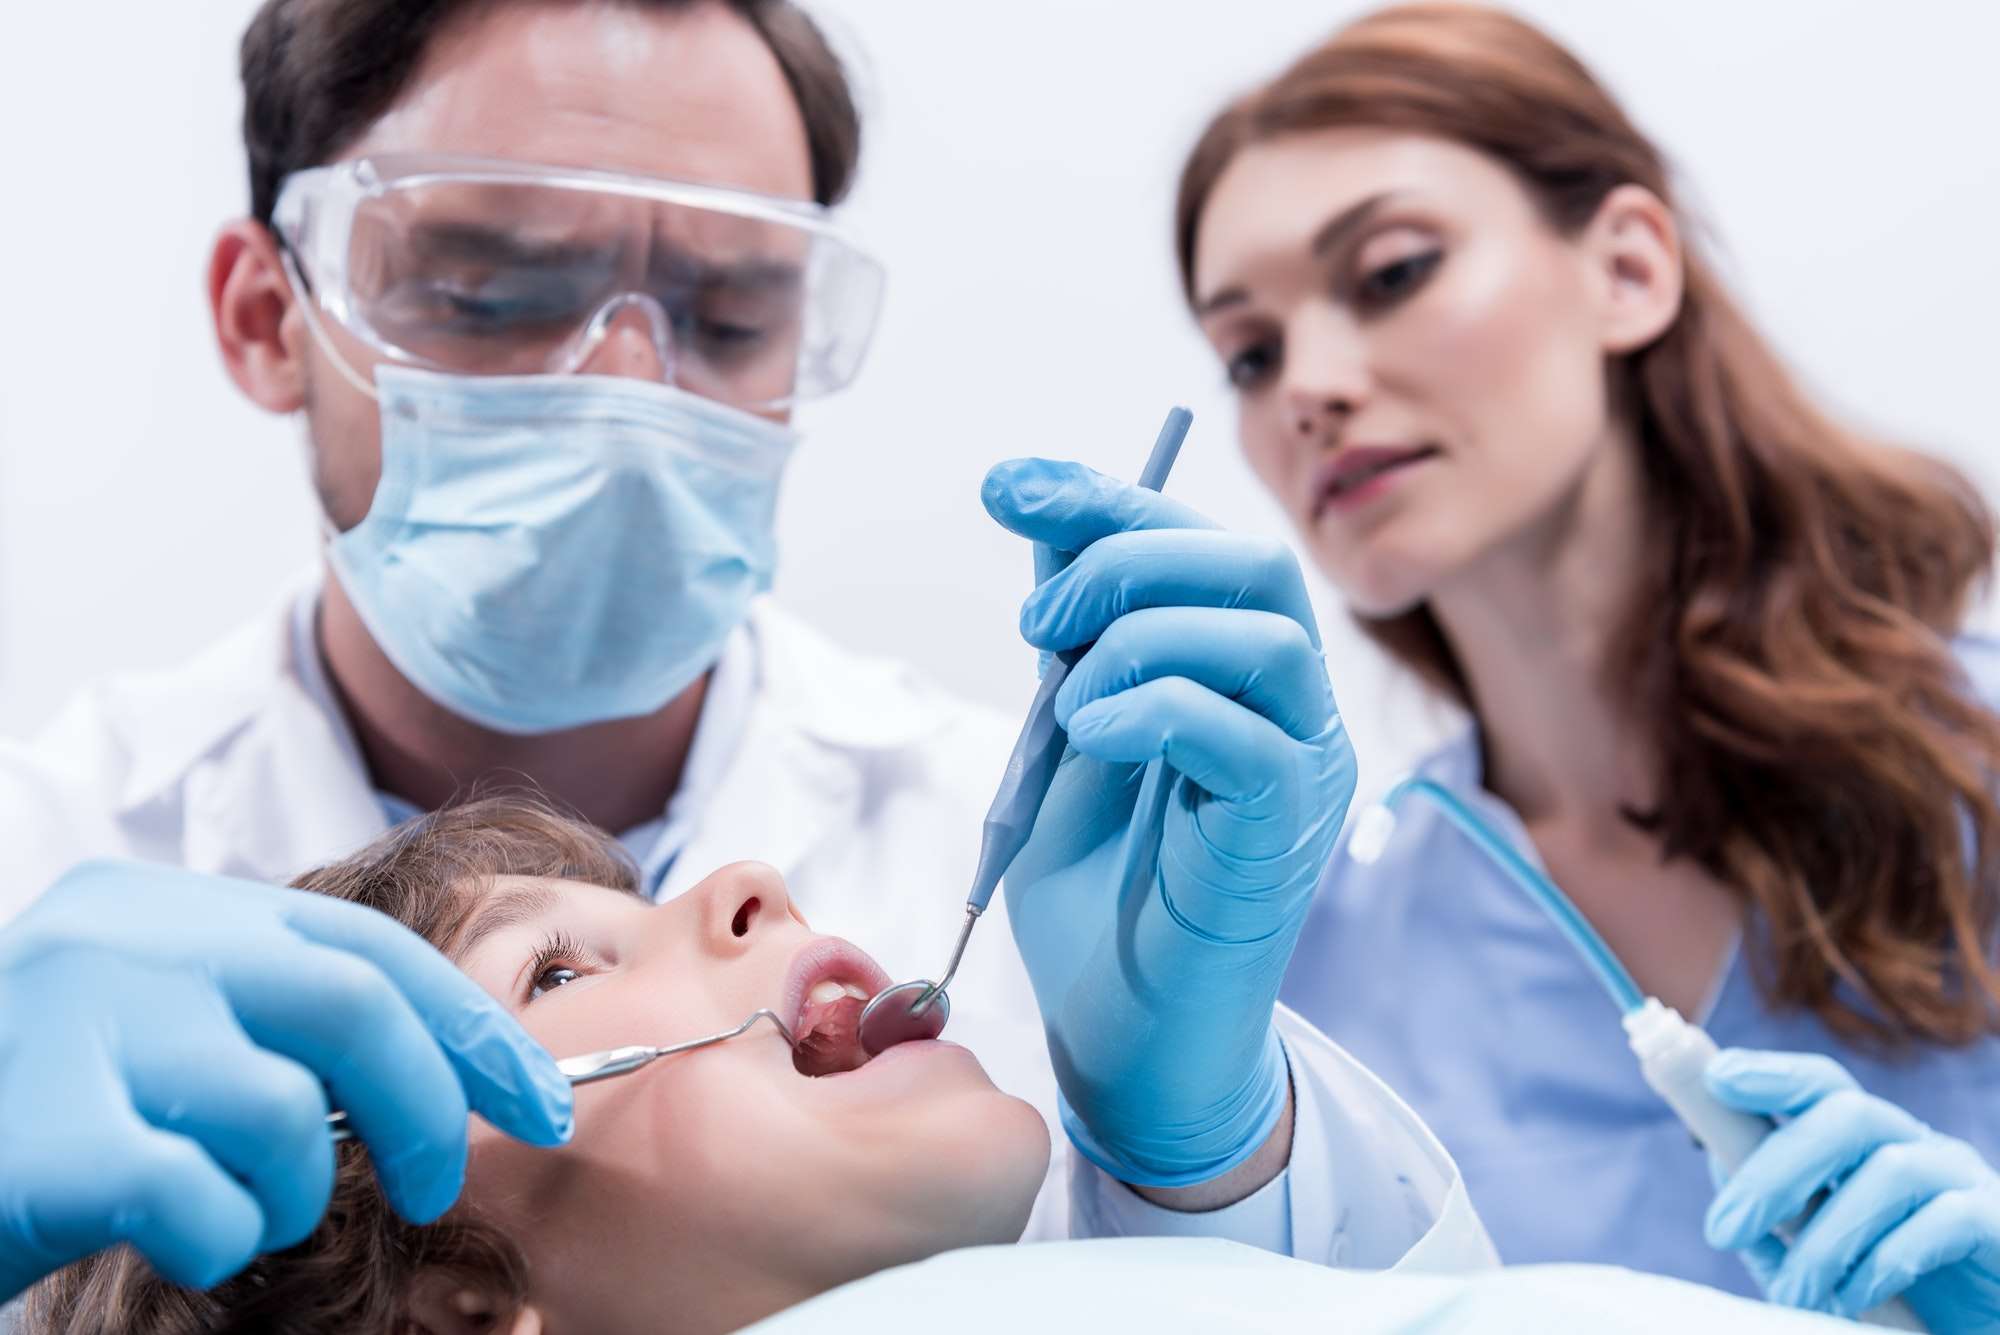 low-angle-view-of-dentists-examining-teeth-of-little-boy-at-dentist-office.jpg